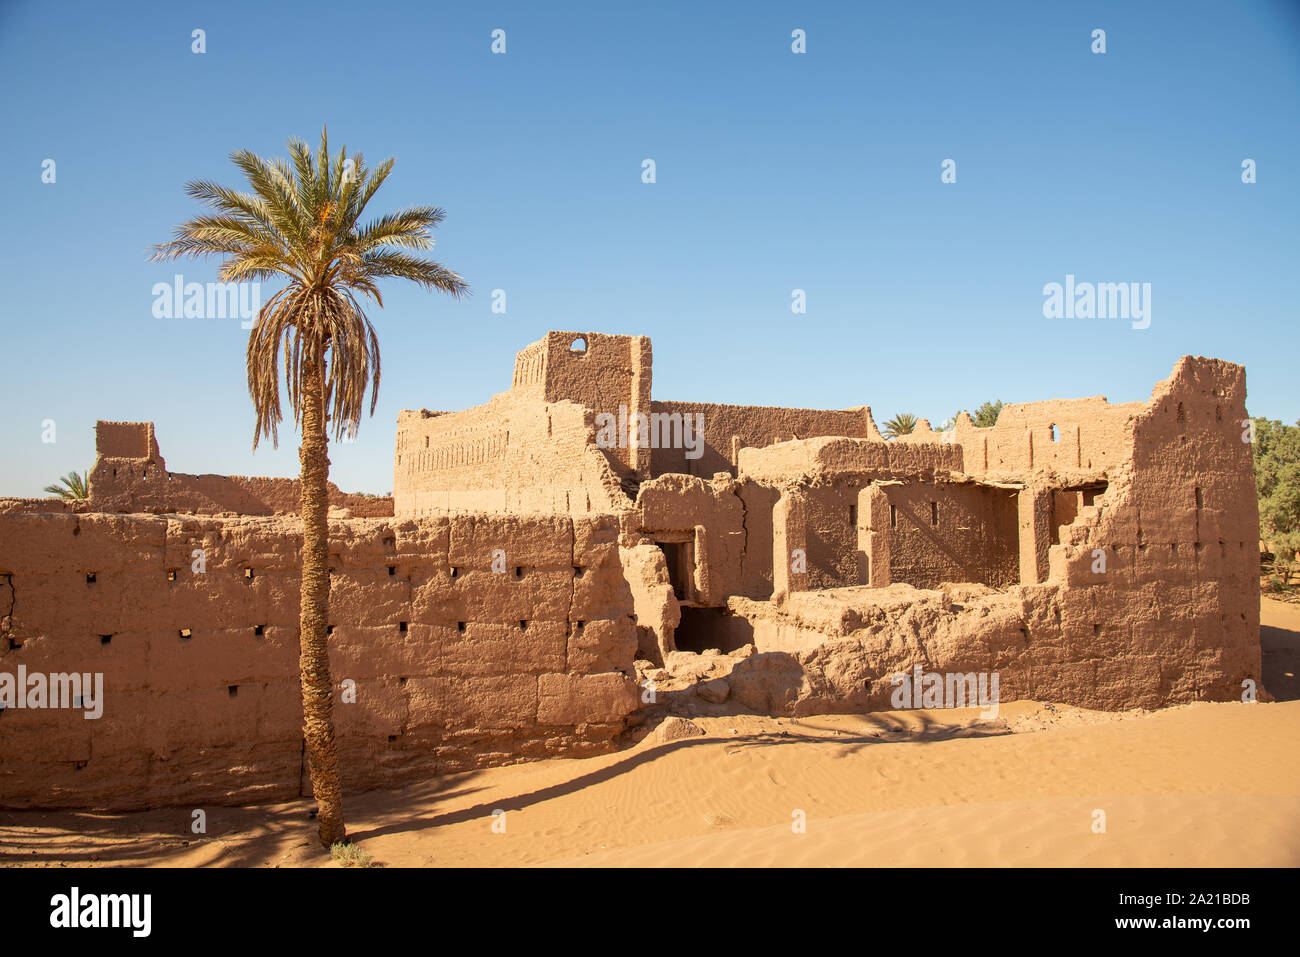 ruin of old casbah Oulad Mhya in desert of Morocco Stock Photo